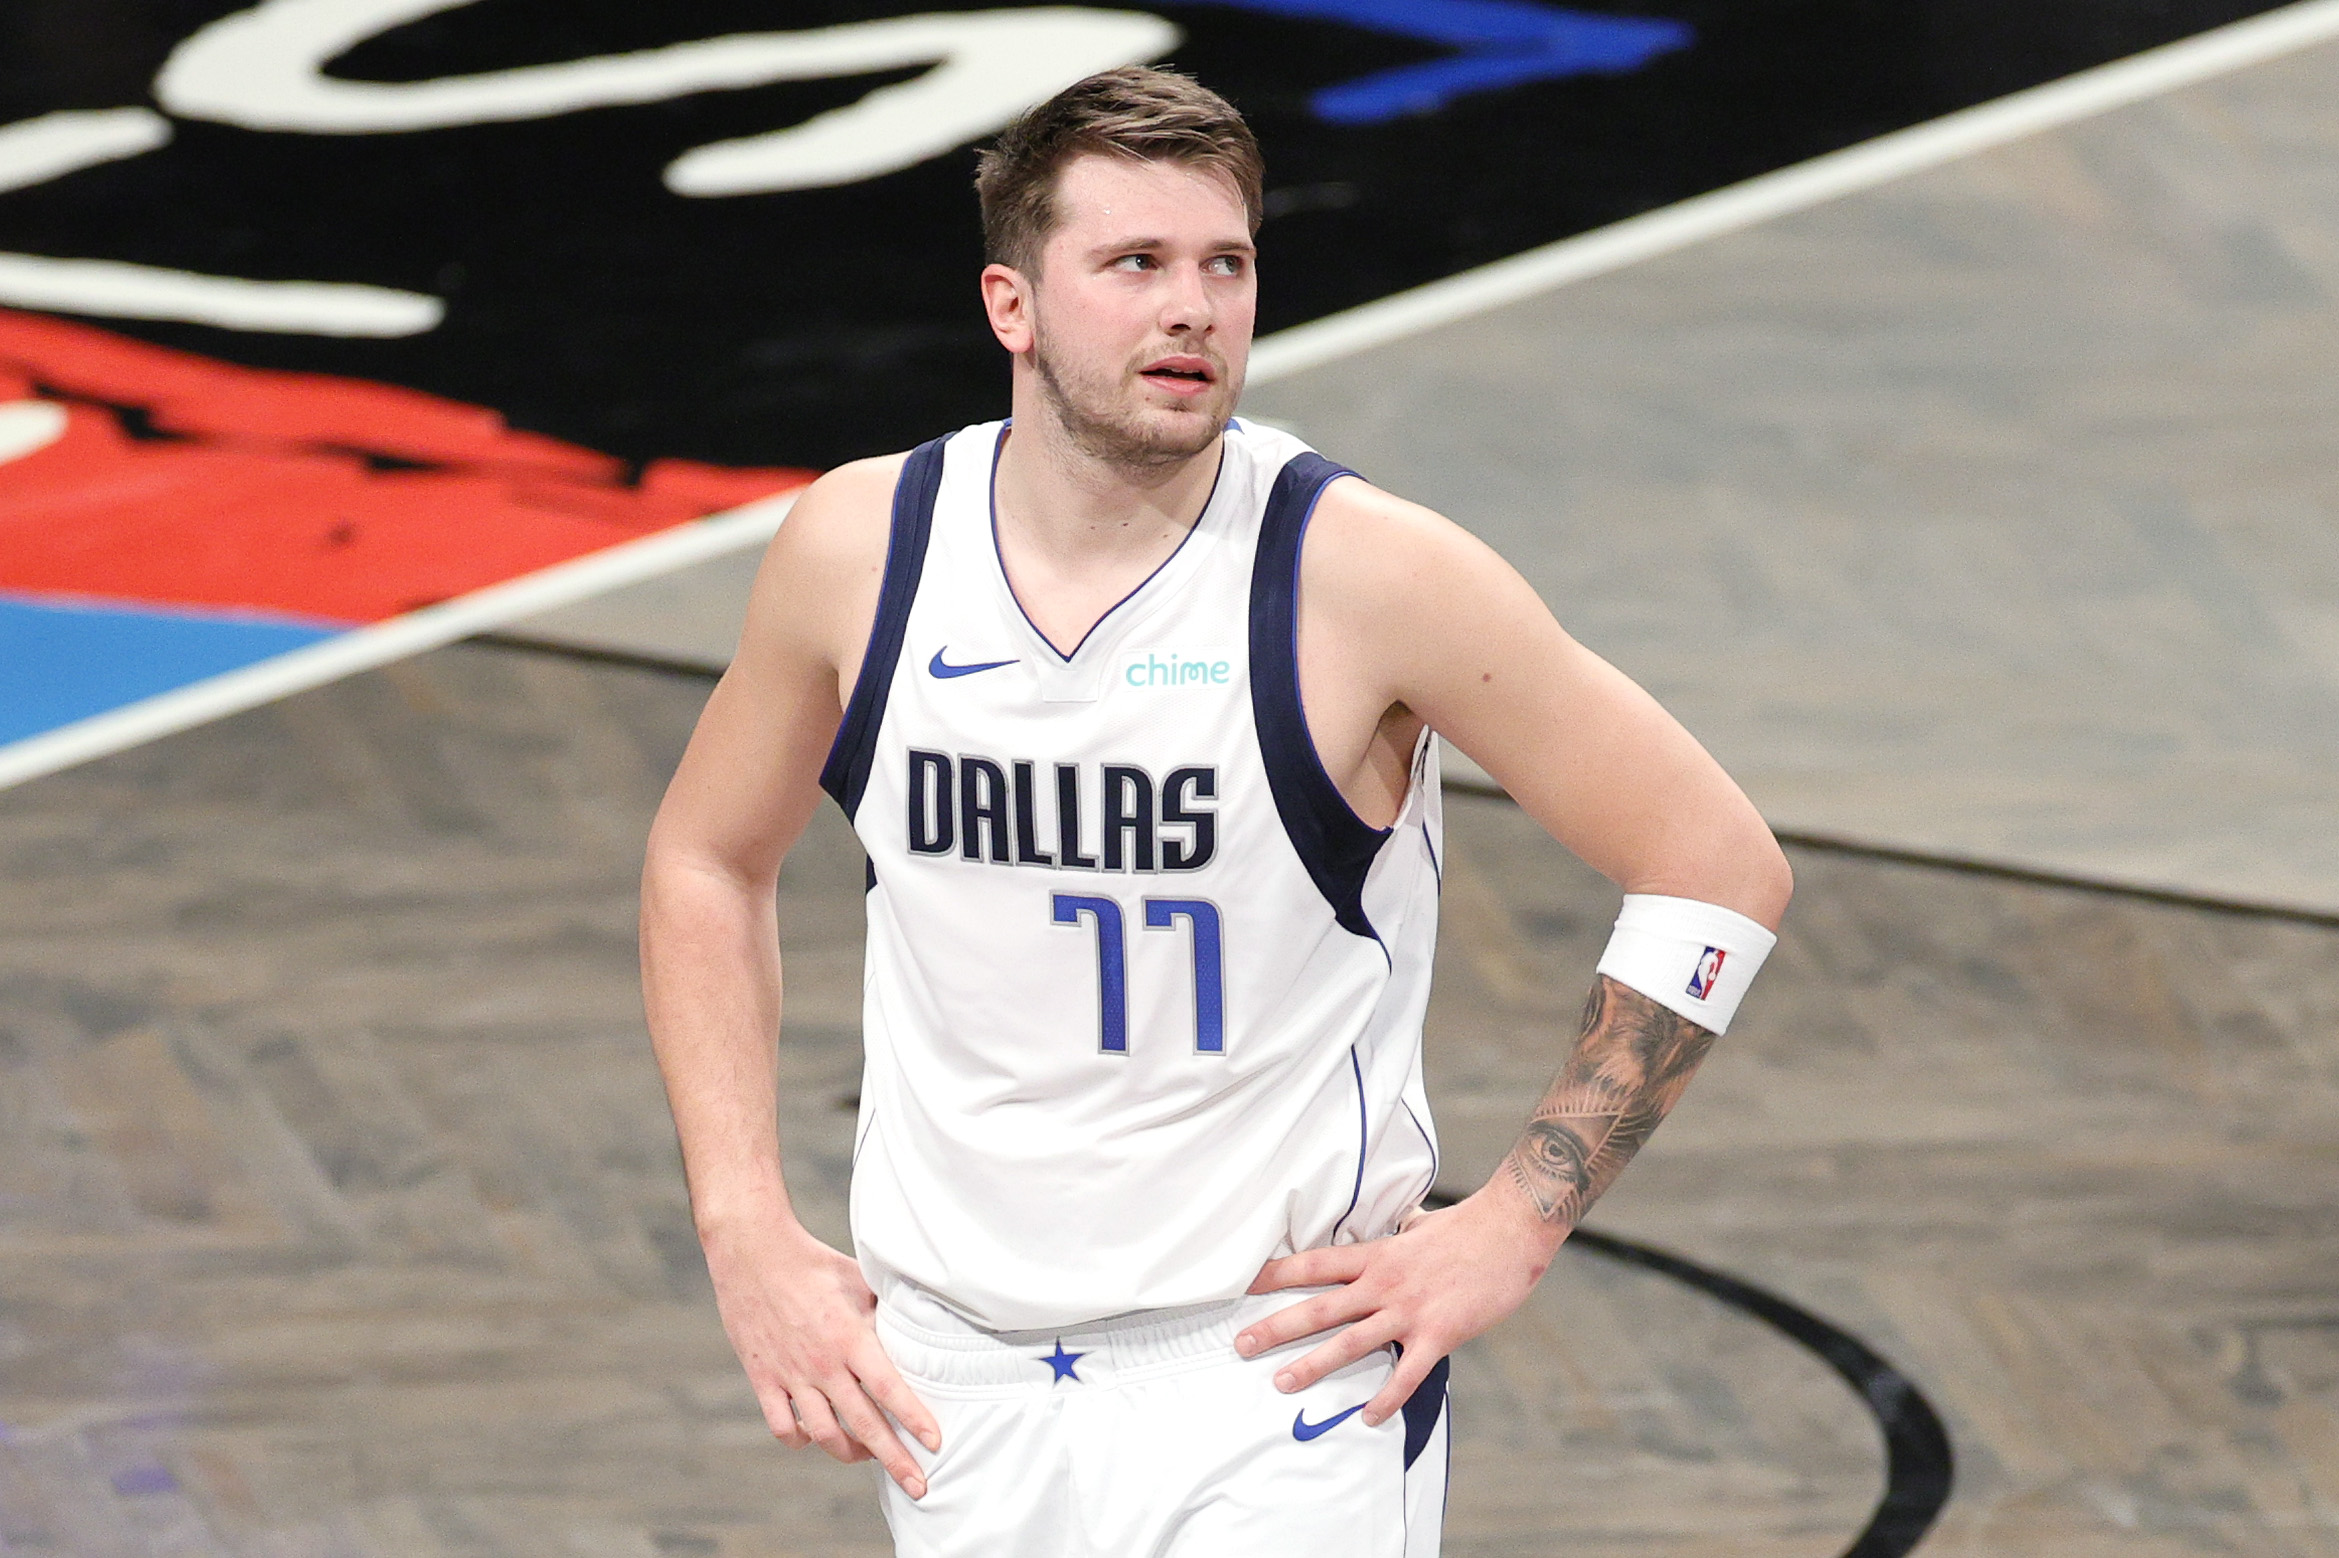 Luka Doncic Rookie Card Astonishingly Sells For More Than Half His 2020 21 Salary